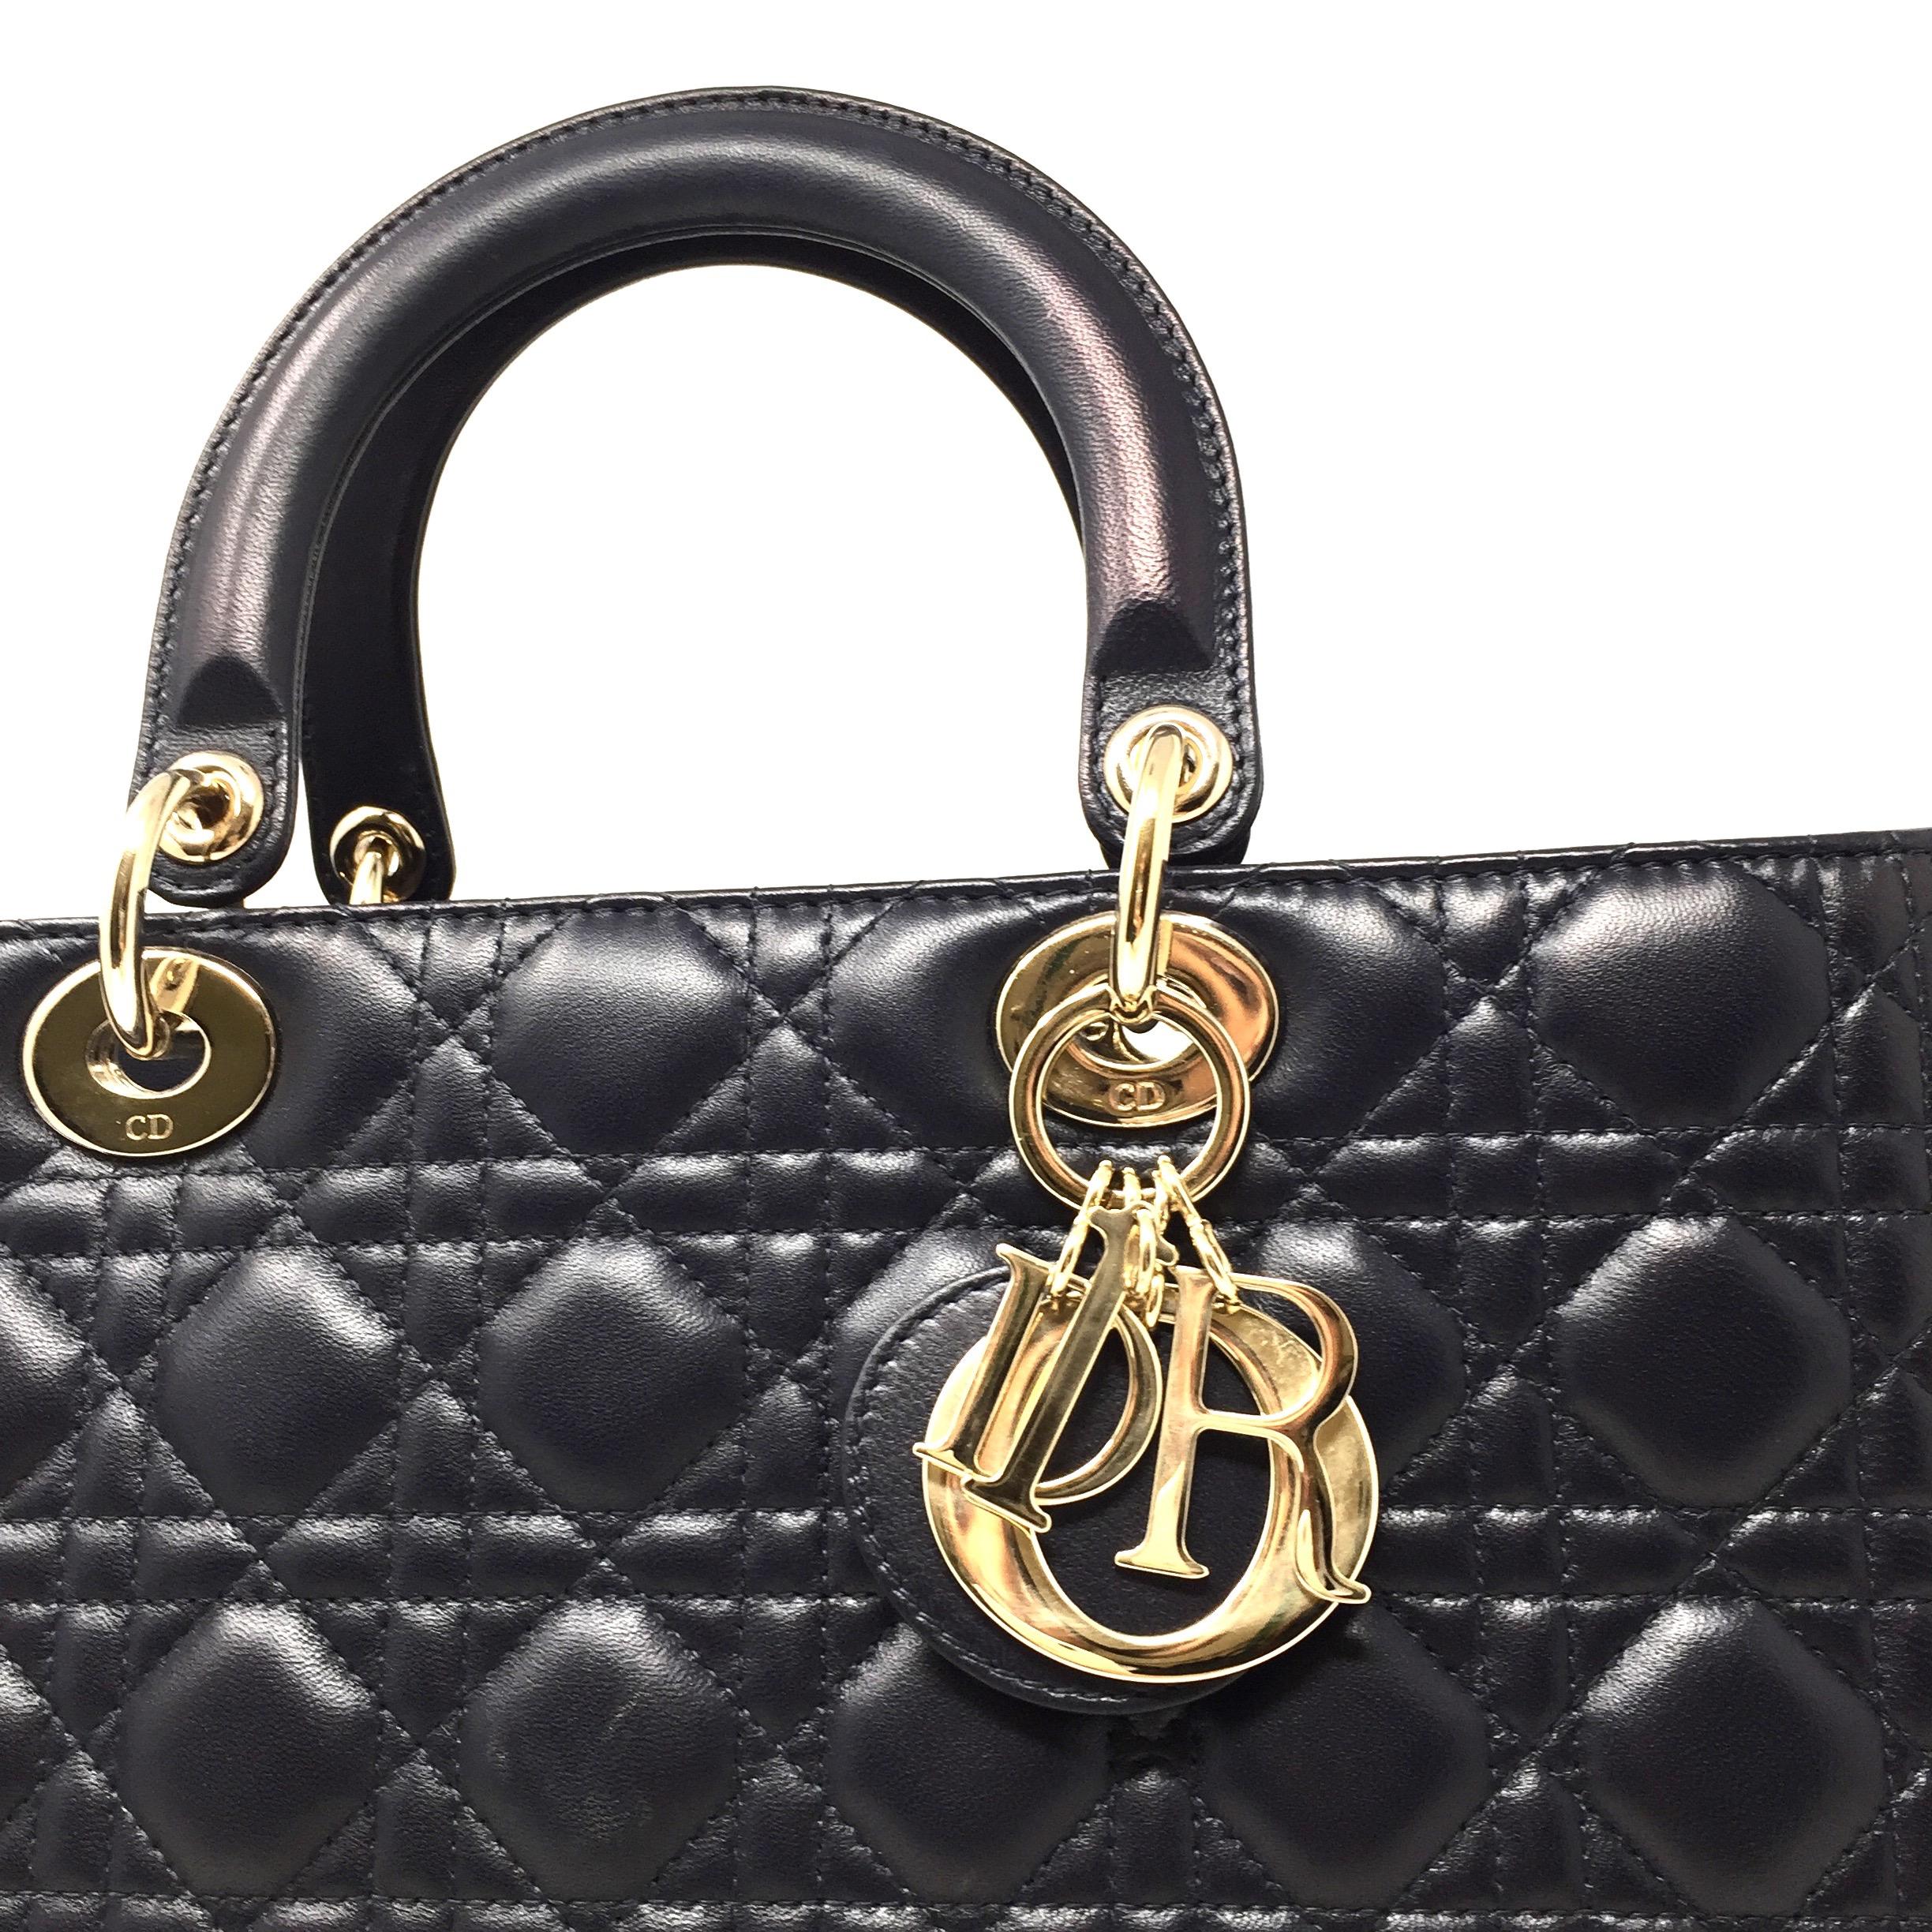 The Lady Dior tote Crafted from blue leather, this tote carries a cannage pattern exterior. It is equipped with dual rolled top handles, classic Dior letter charms and protective metal feet. The top zip closure opens to a spacious nylon lined